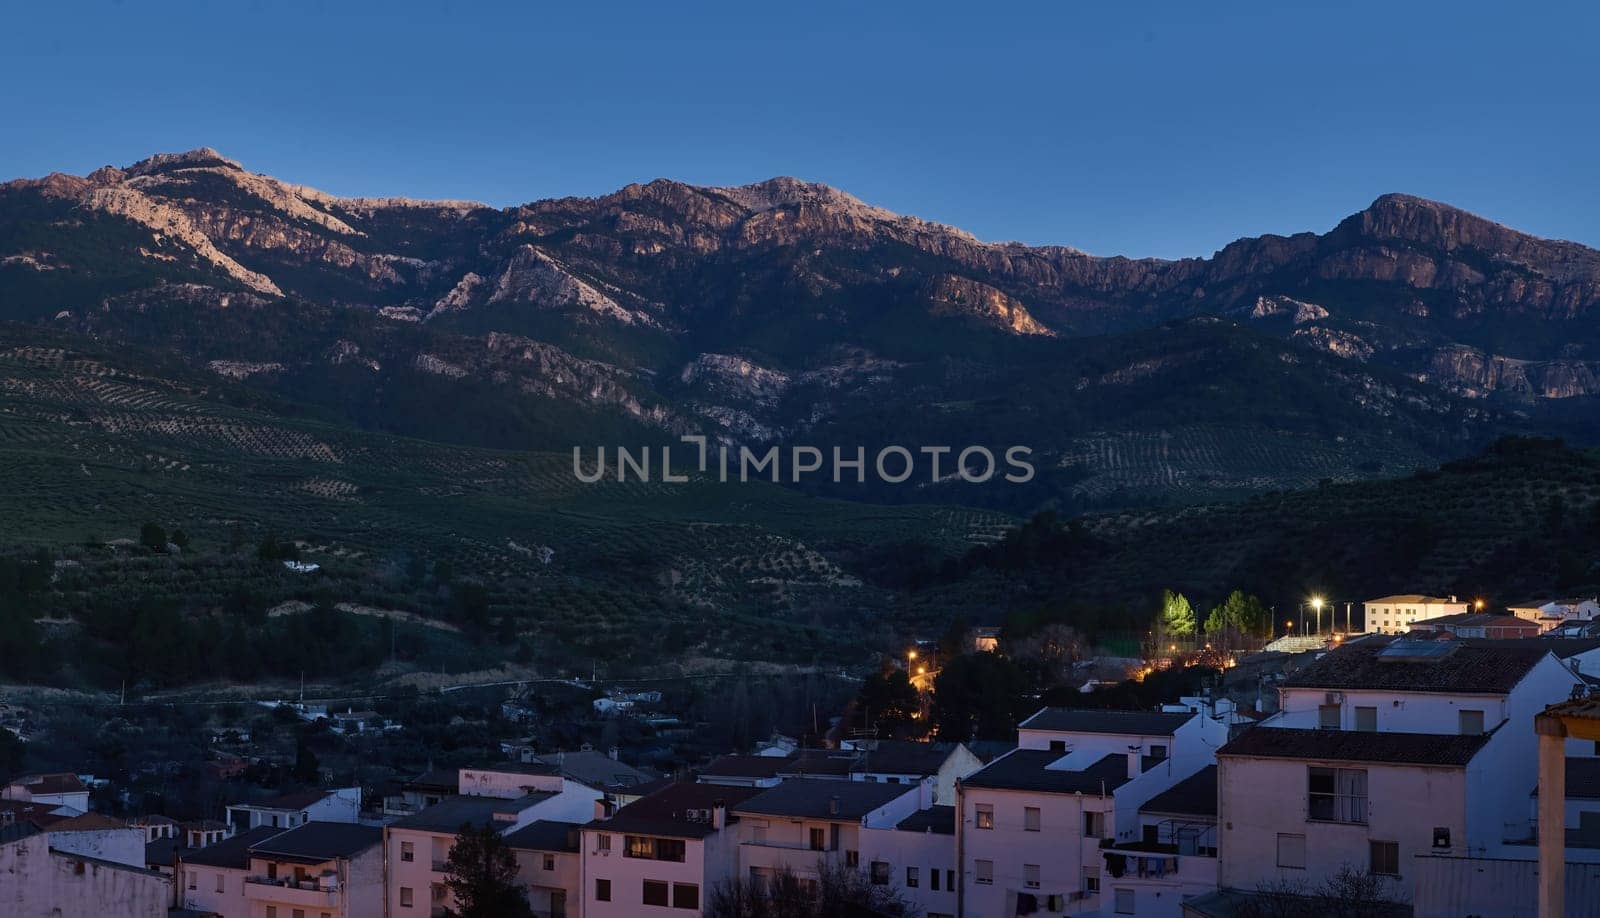 Sierra de Cazorla. Quesada Andalusia Spain. Beautiful mountains at evening and white buildings on the foreground. by artgf